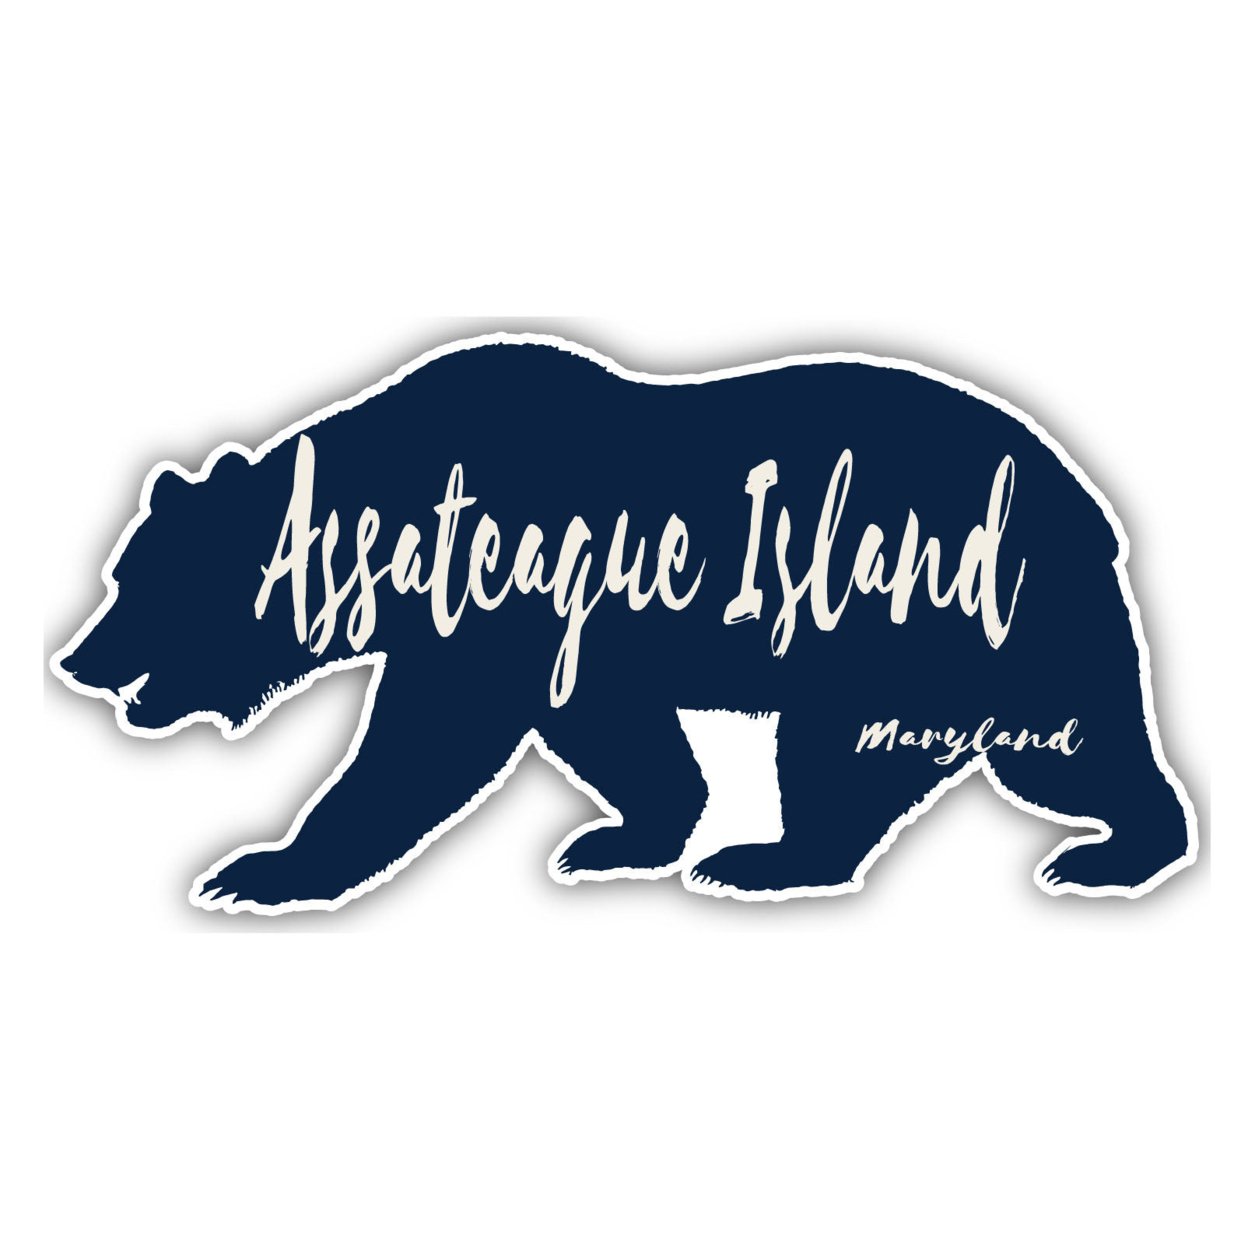 Assateague Island Maryland Souvenir Decorative Stickers (Choose Theme And Size) - 4-Pack, 2-Inch, Bear